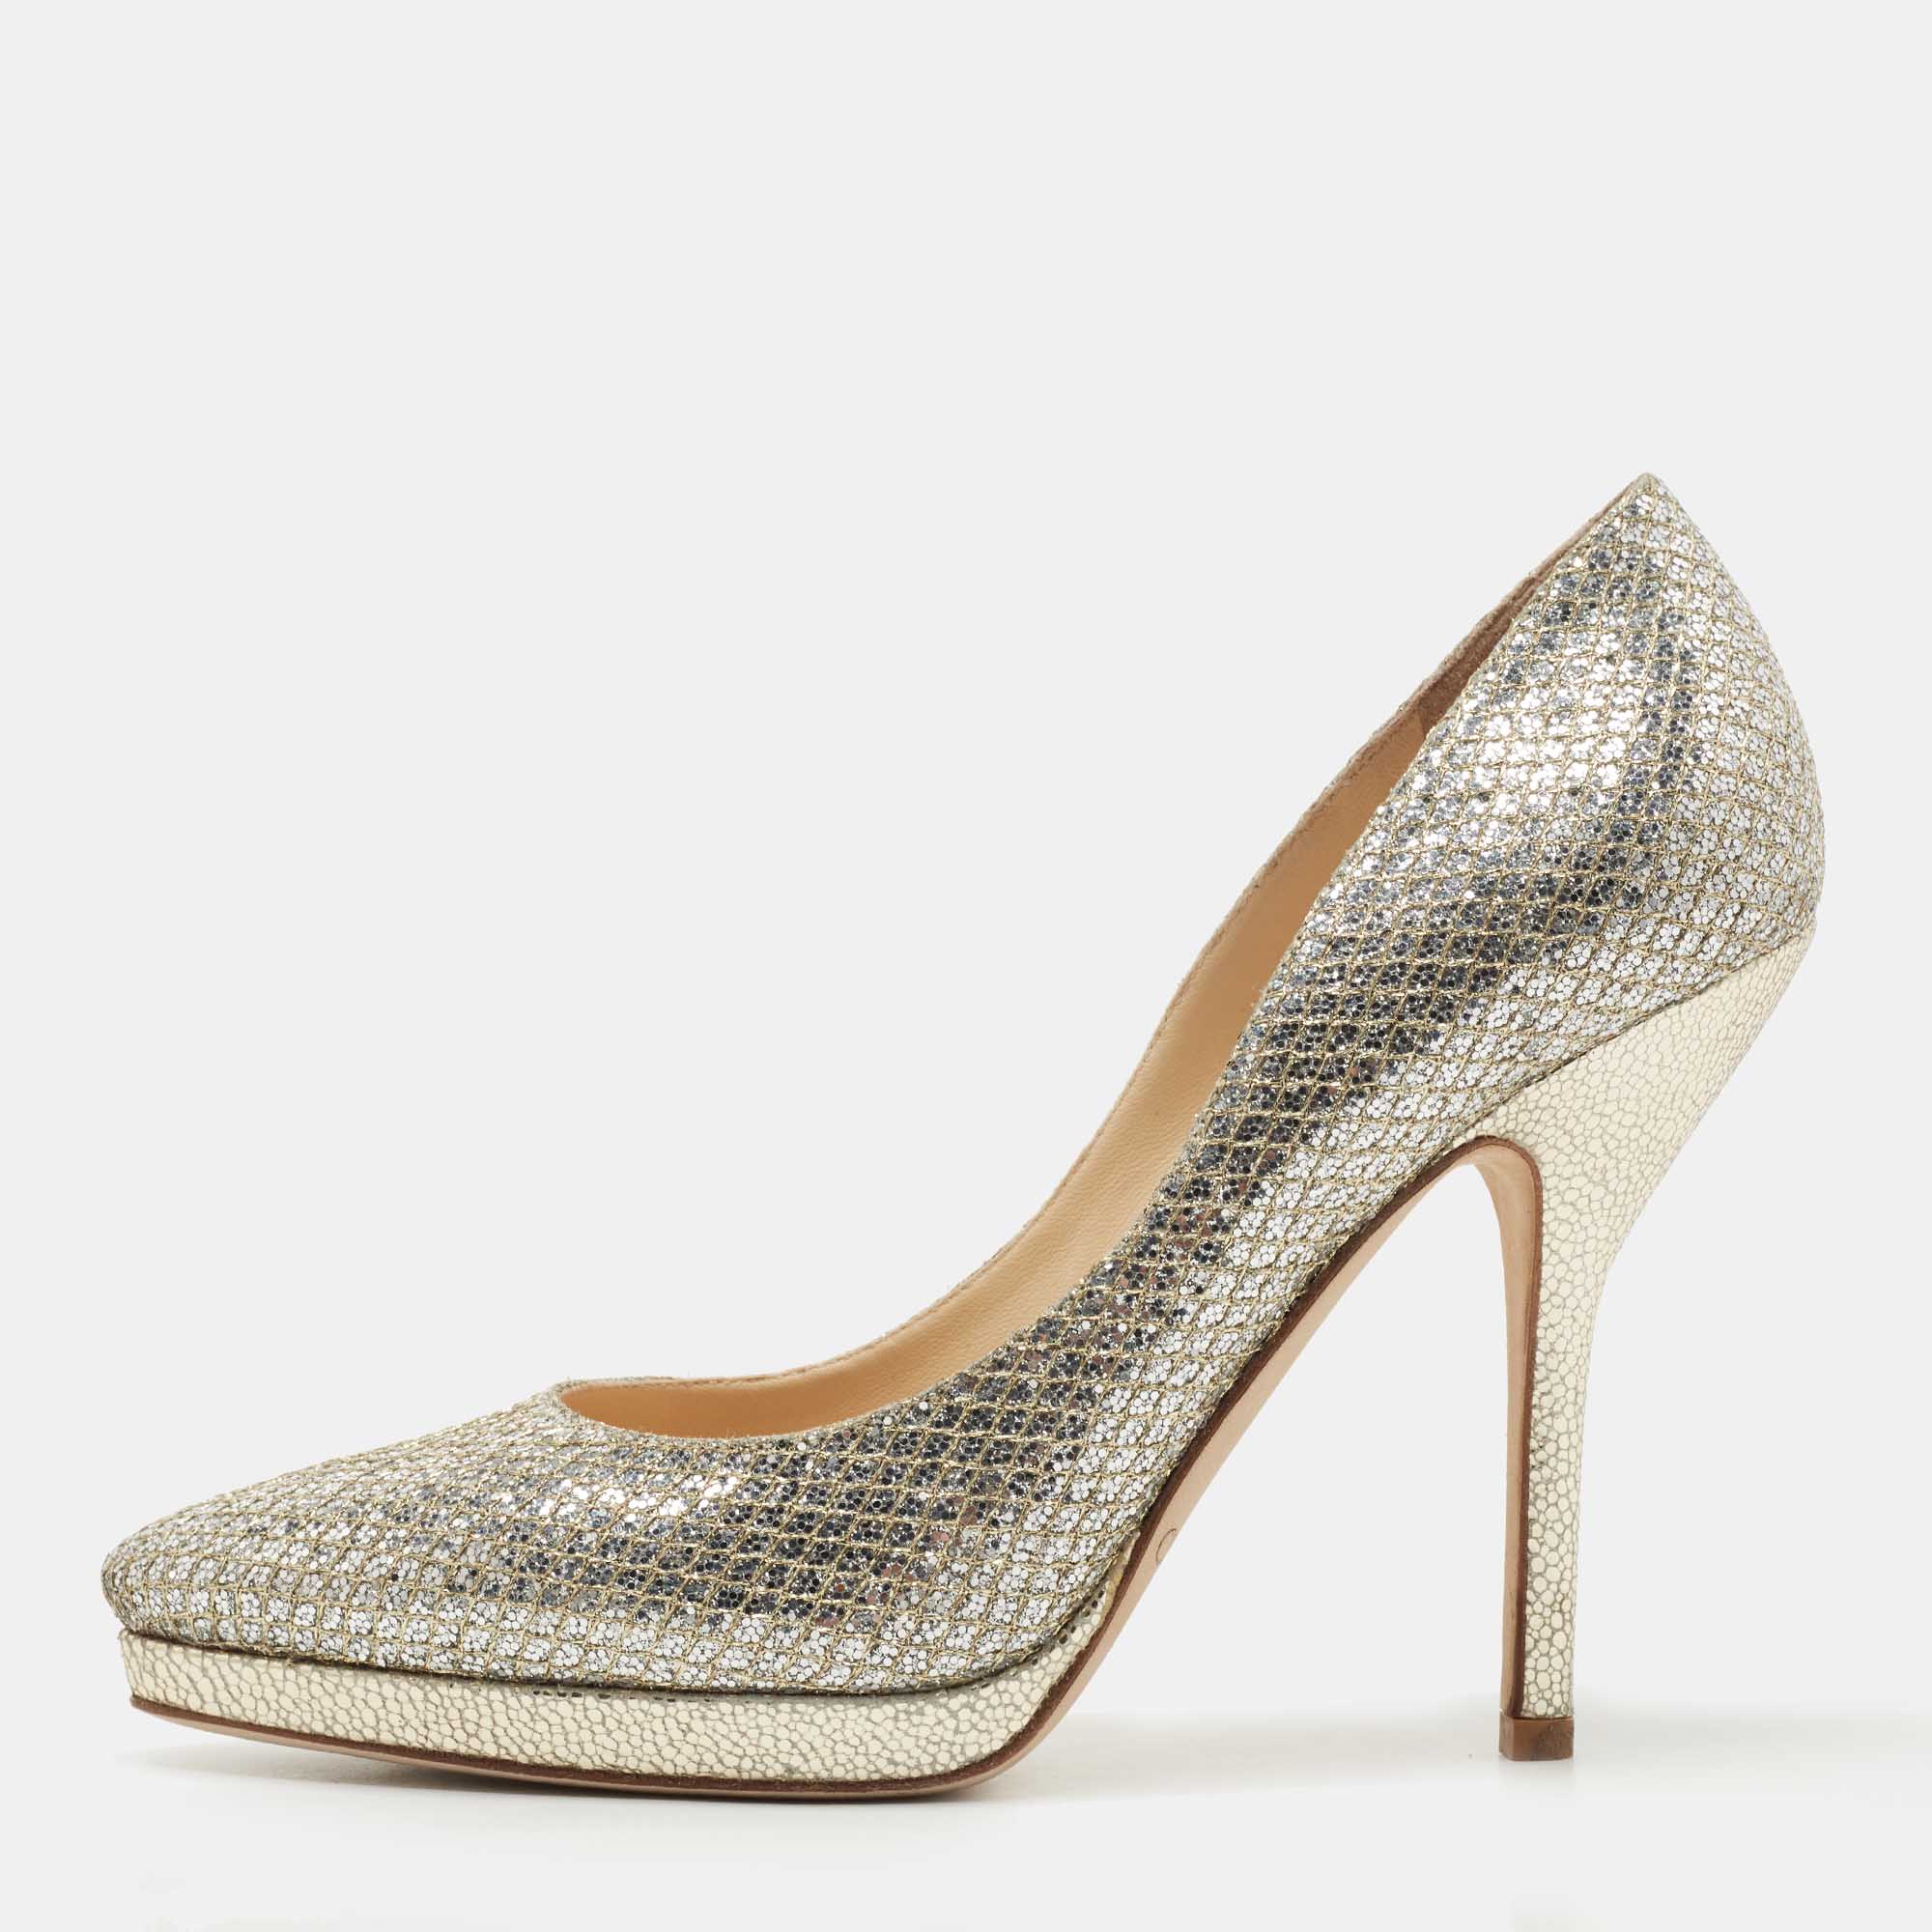 Jimmy choo silver glitter and leather platform pumps size 37.5